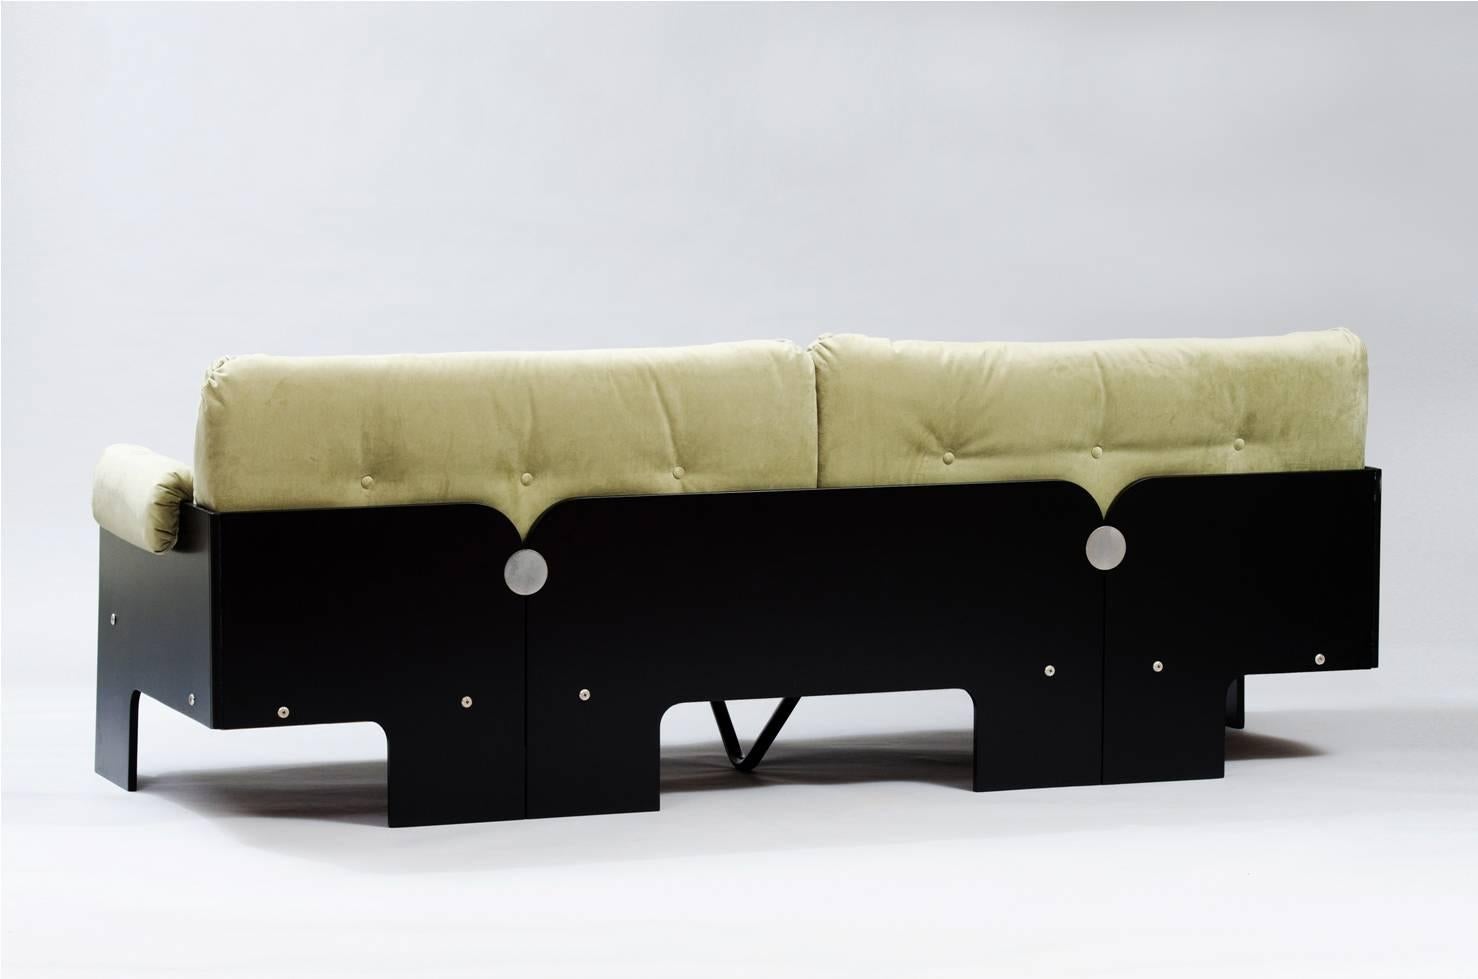 Three-seat sofa in black lacquered wood, upholstered in green velvet, in the style of Claudio Salocchi.